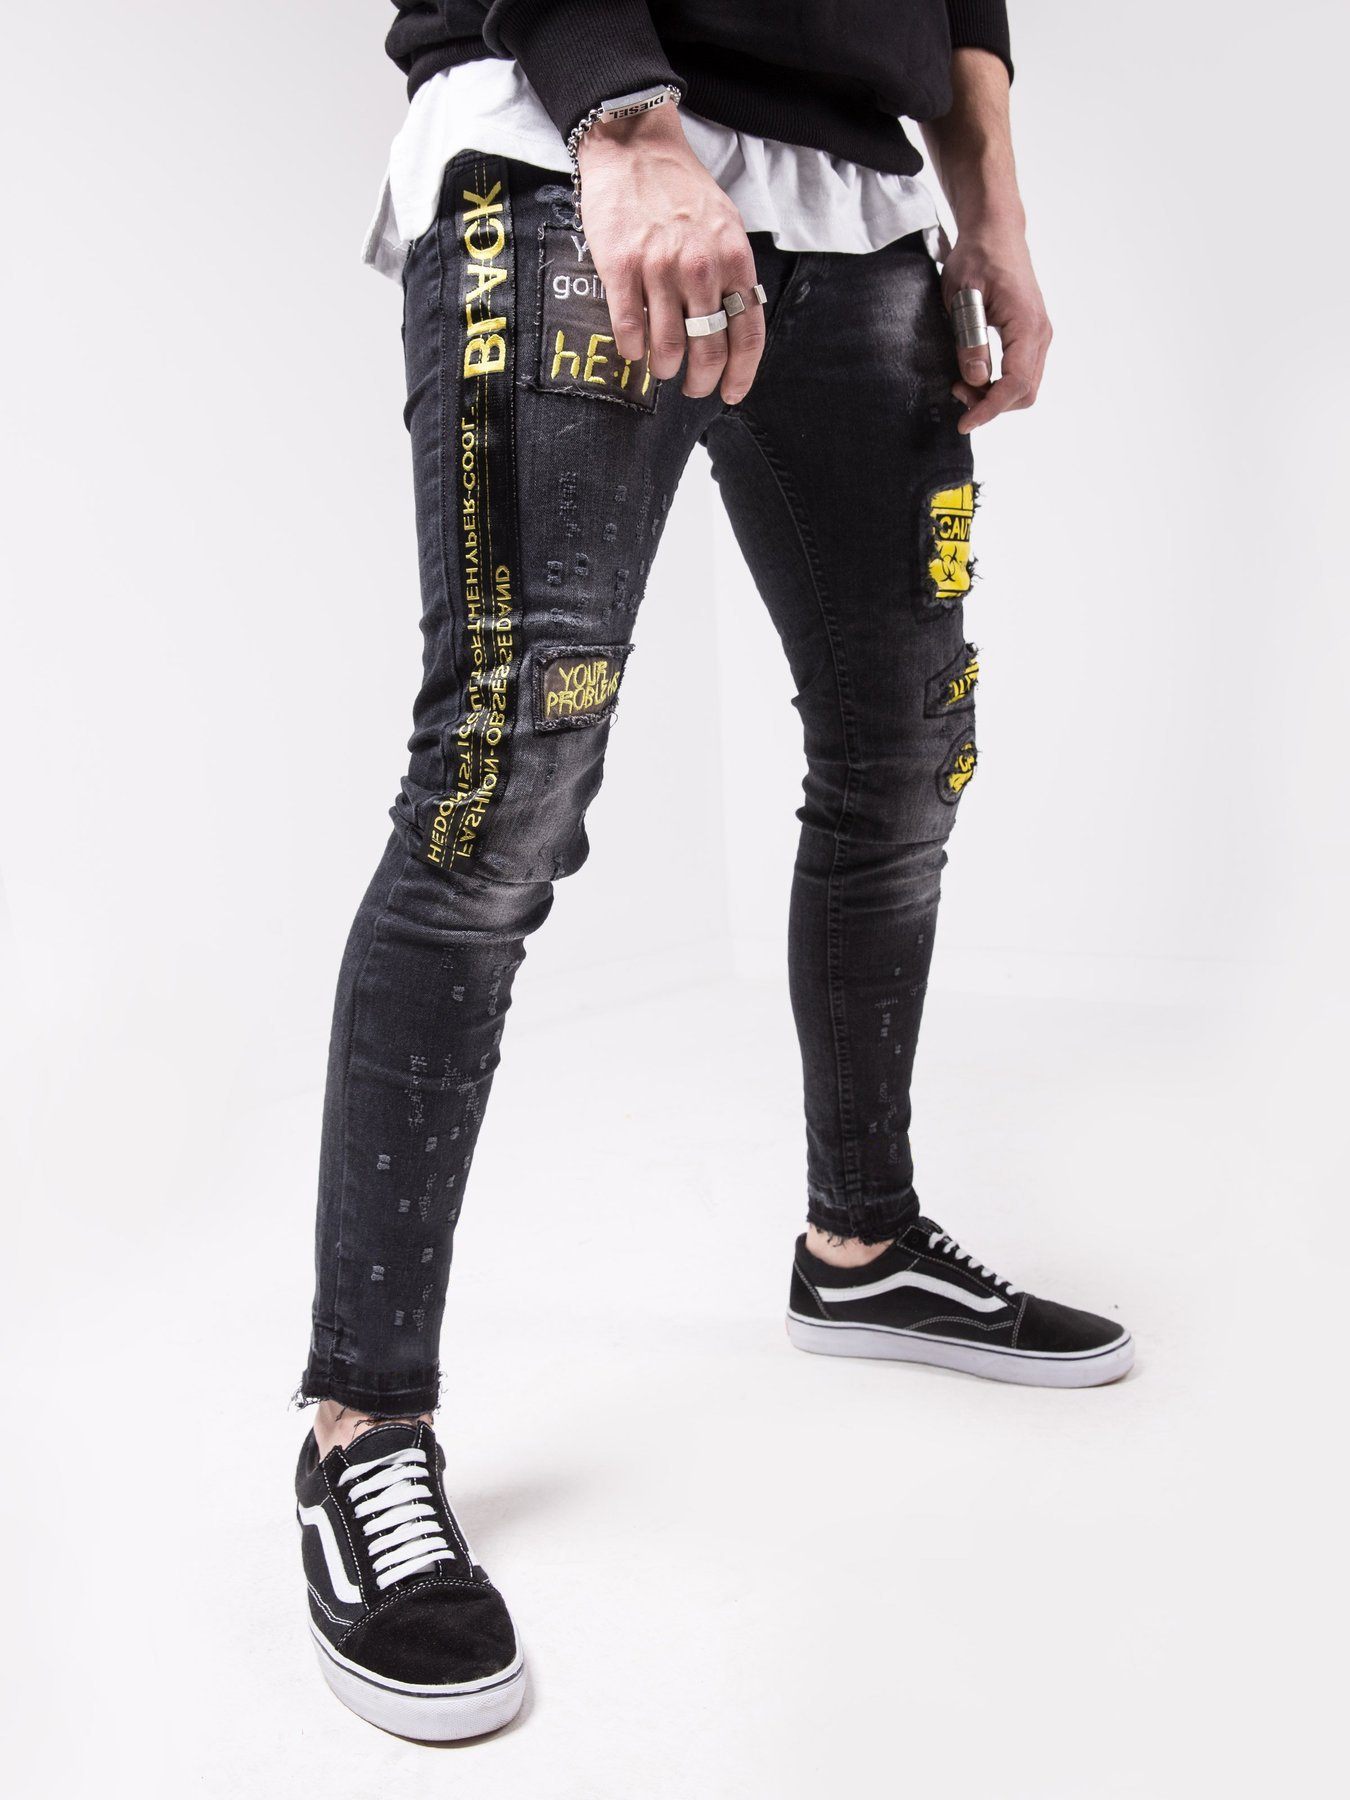 A man wearing BLACK FALCON jeans with yellow stripes.